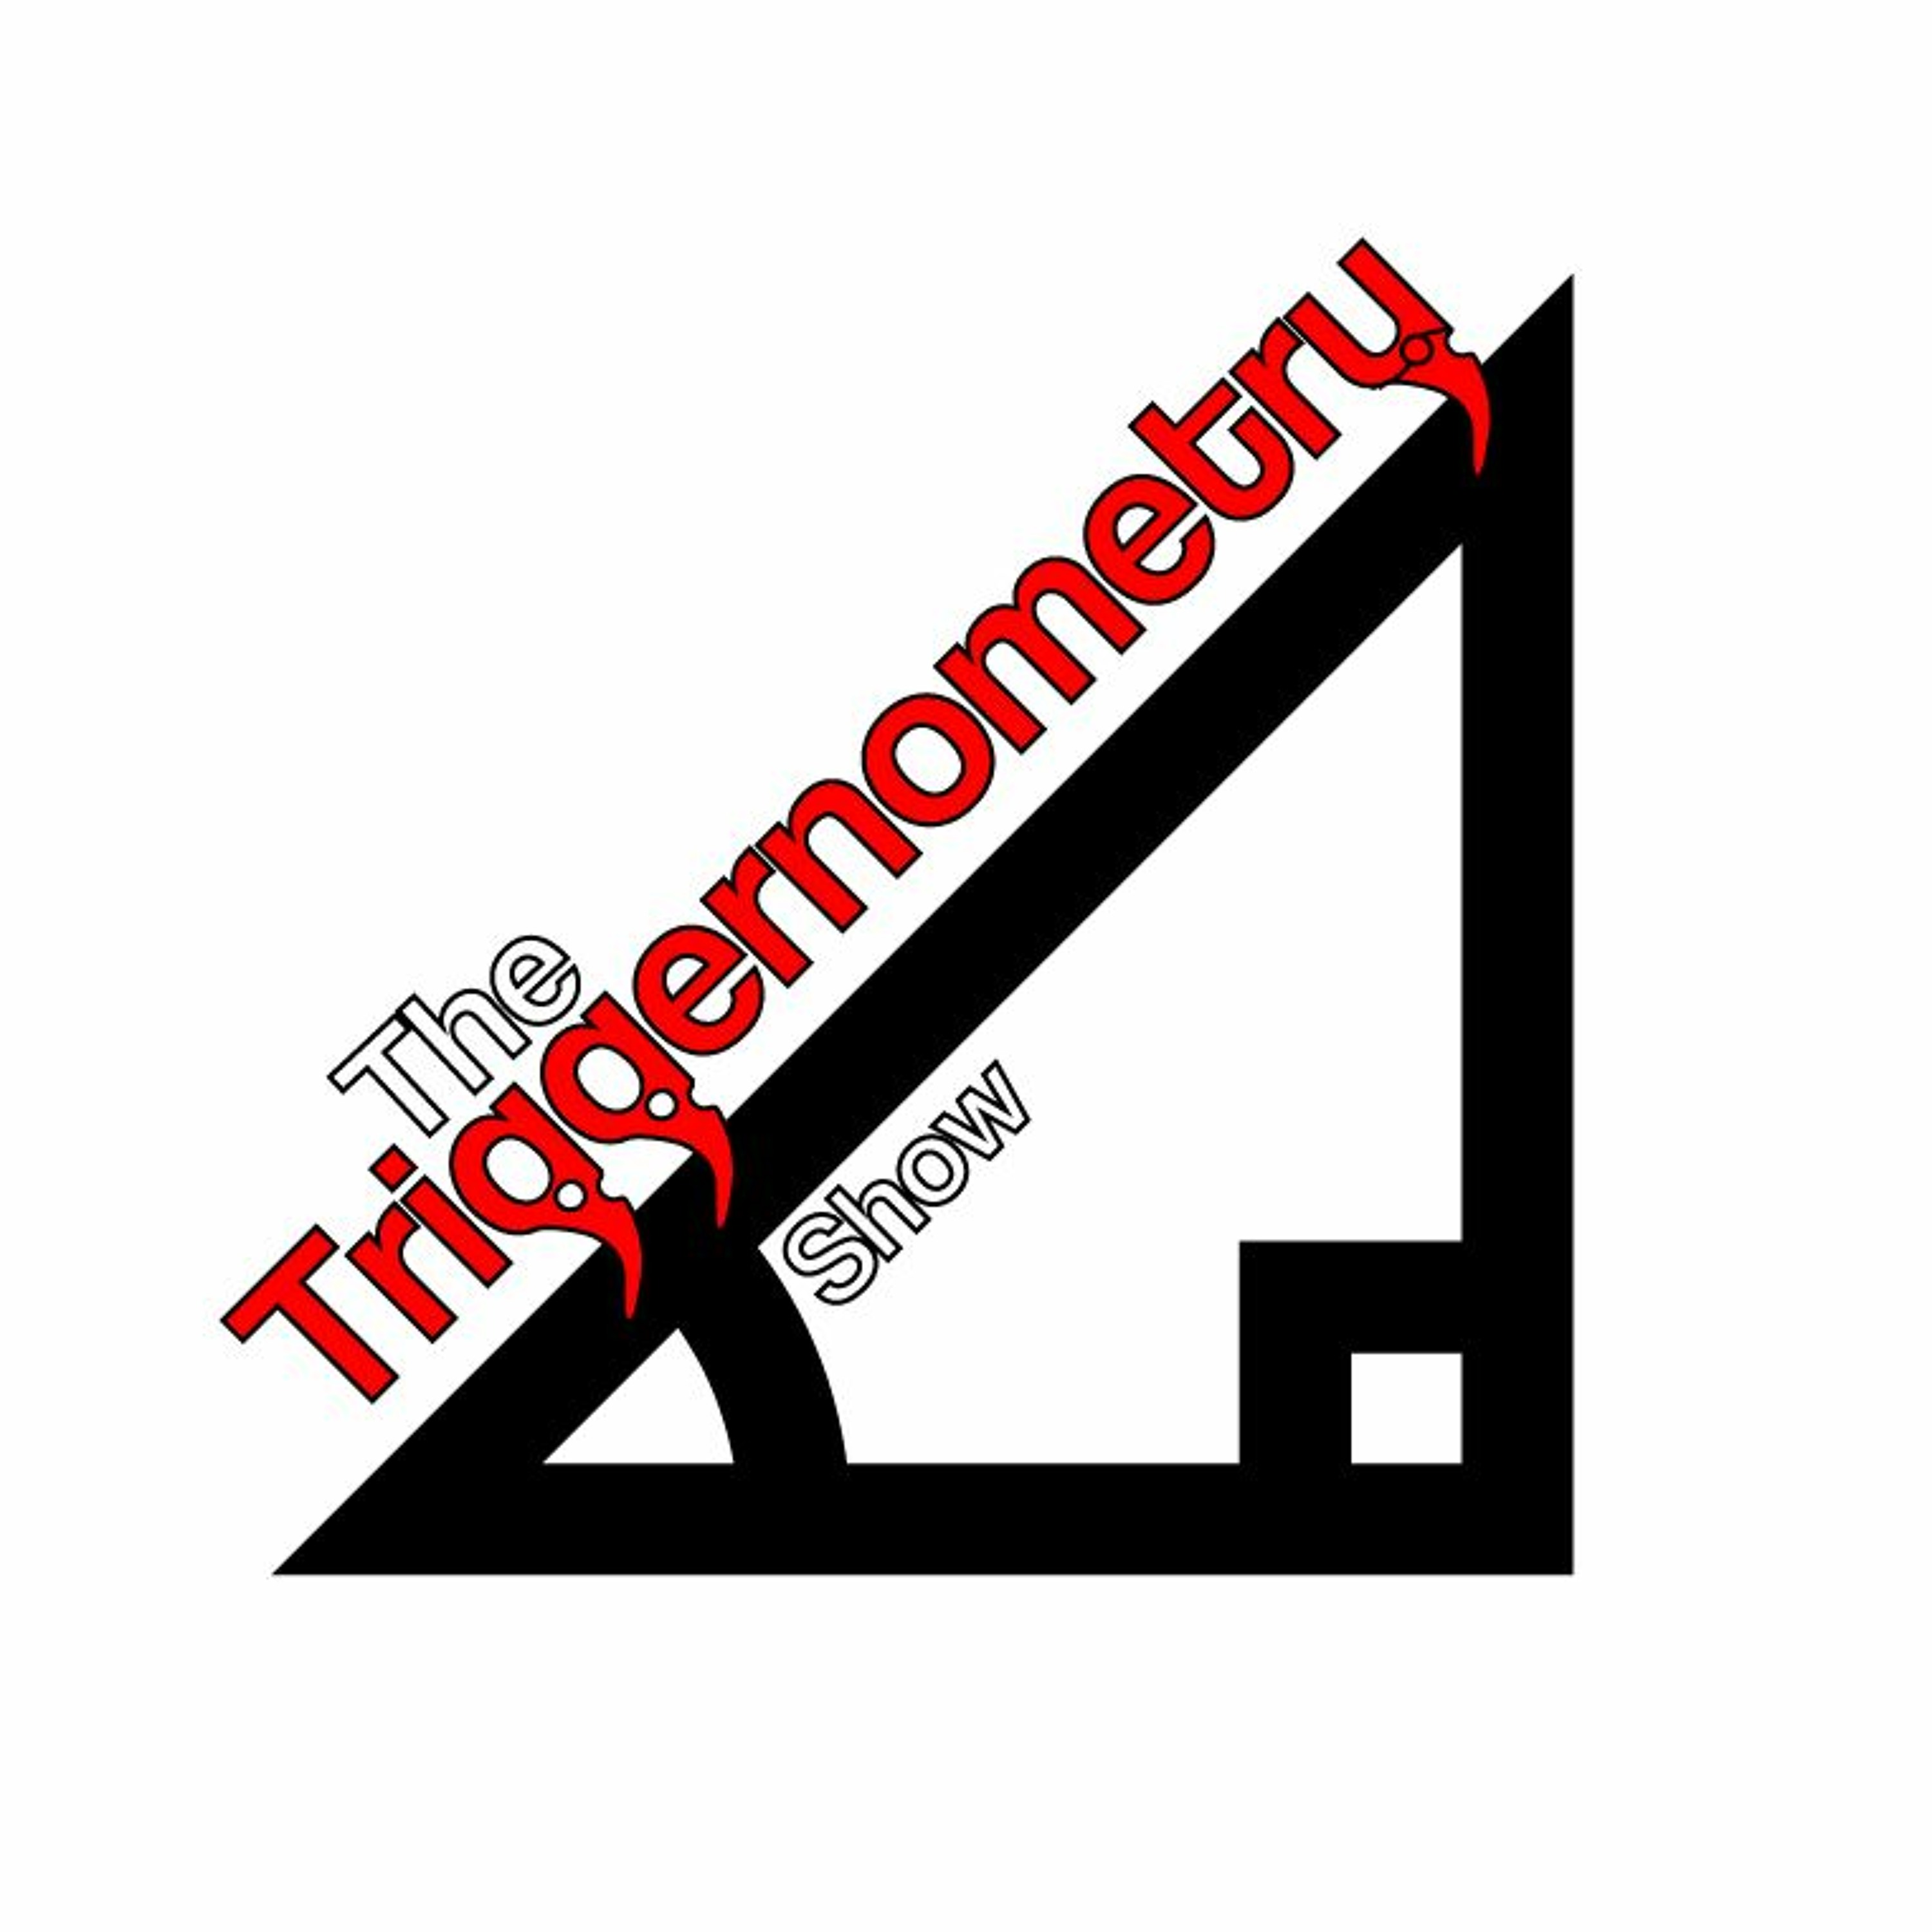 The Triggernometry Show - Live - 23rd September - Reticles with Kerry, Geoff, Ian and David!